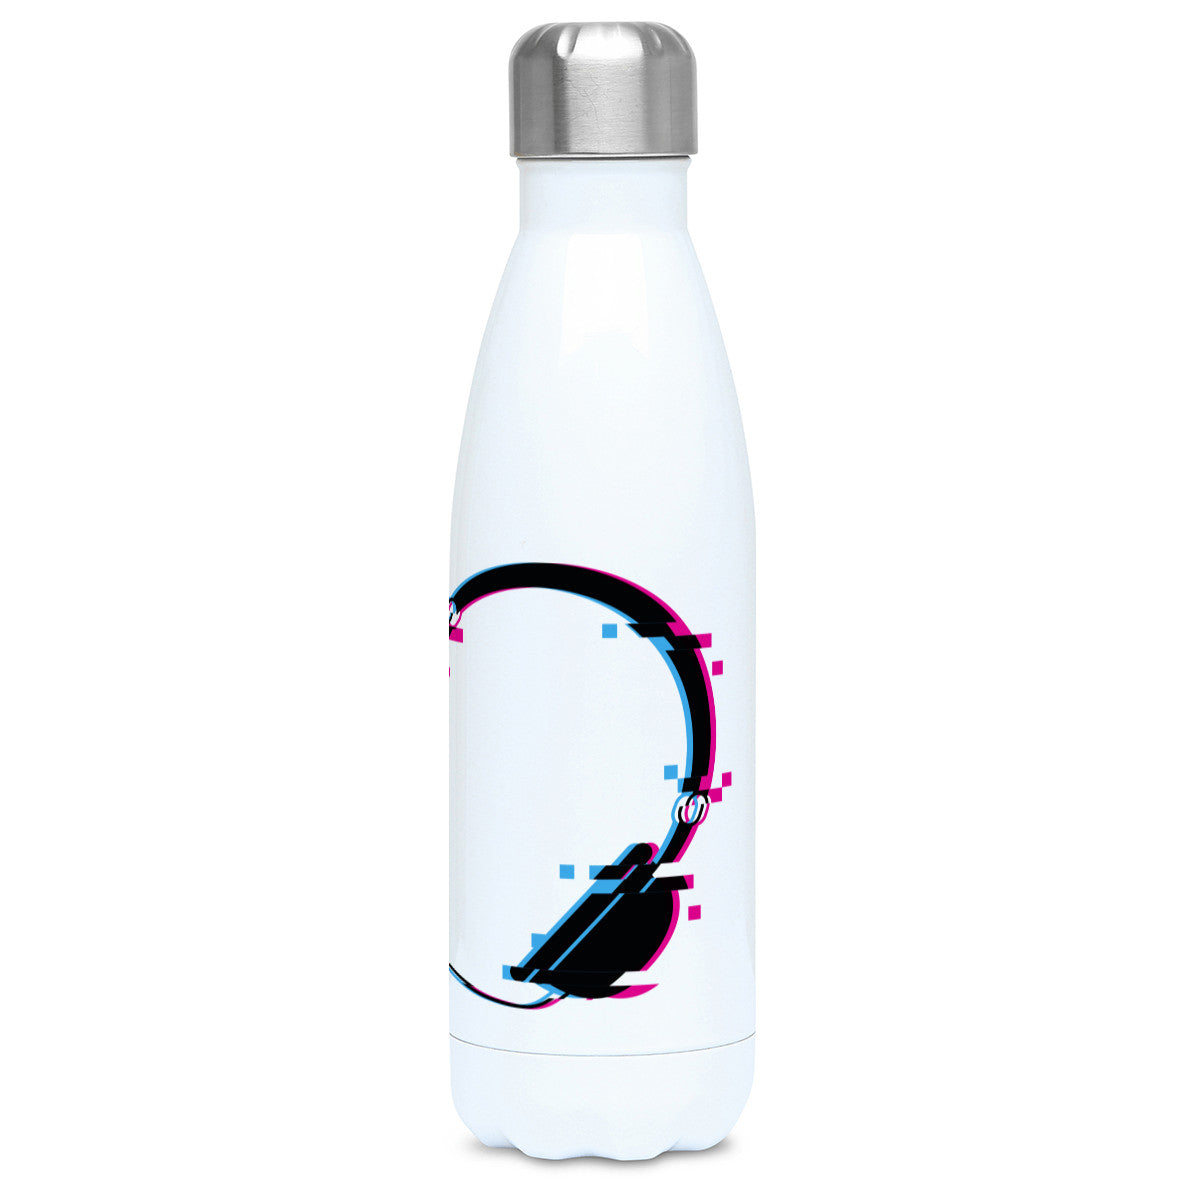 Headphones glitch art design on a white metal insulated drinks bottle, lid on